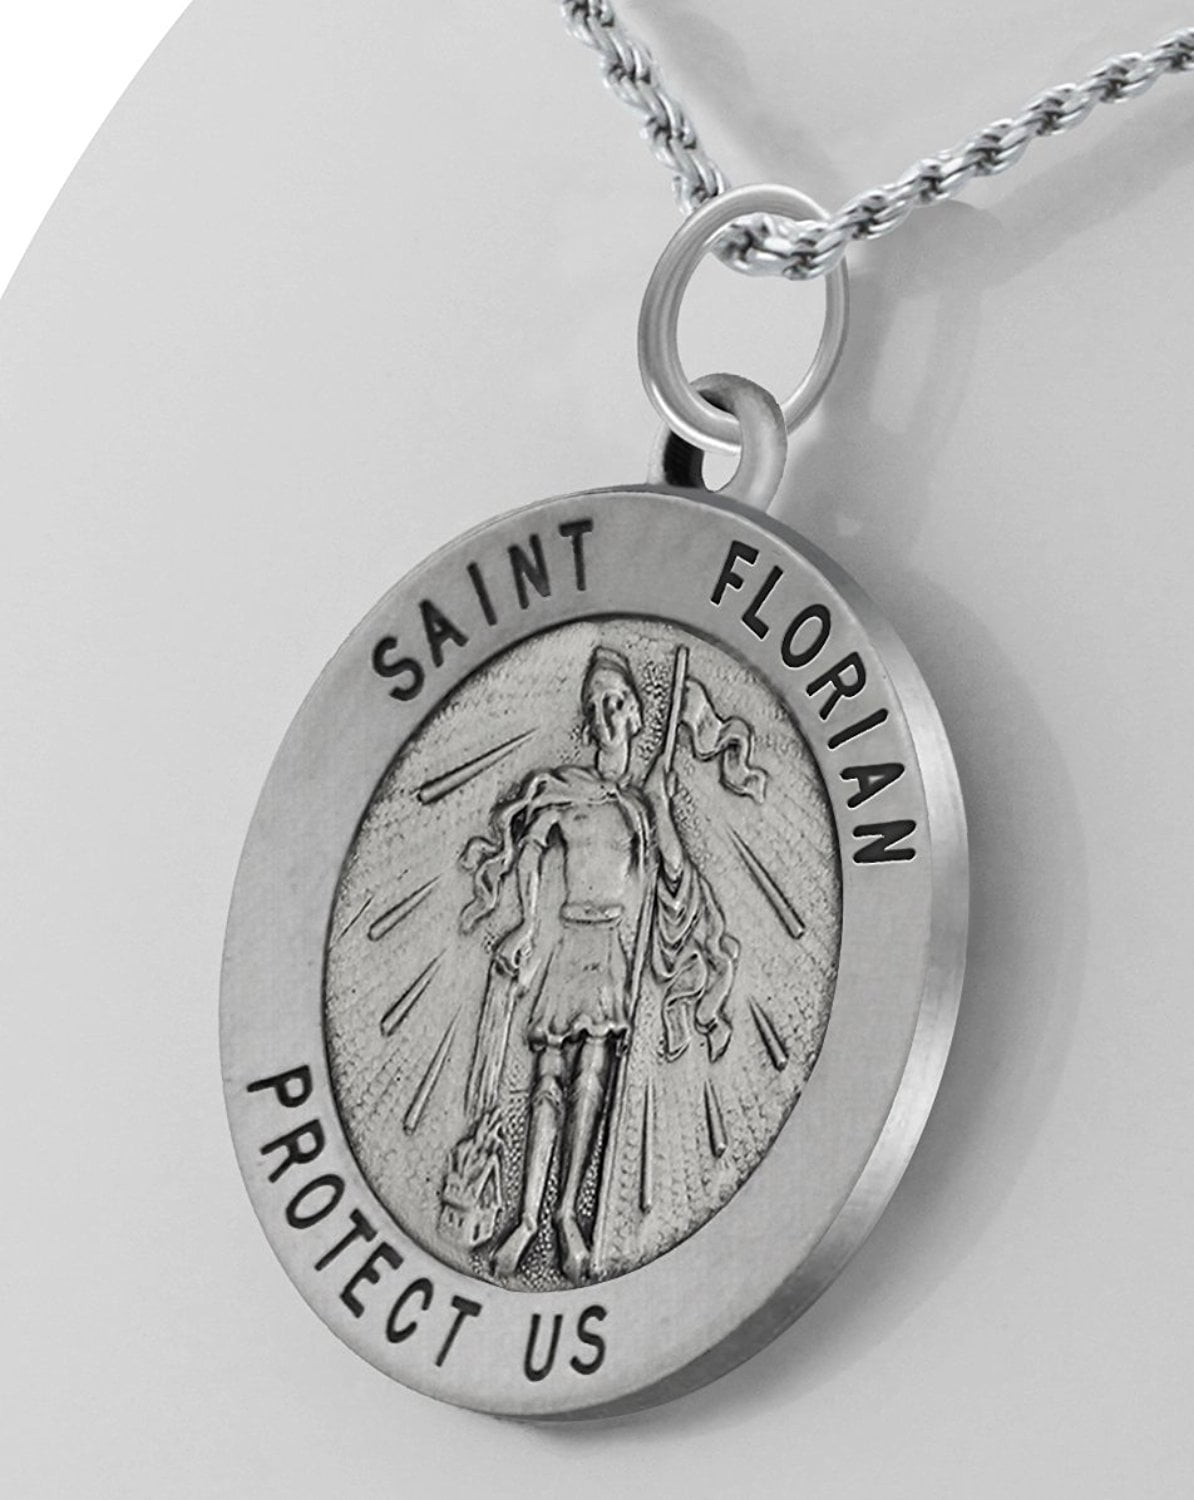 US Jewels And Gems 7/8in Round 0.925 Sterling Silver St Saint Florian Medal Pendant Necklace 